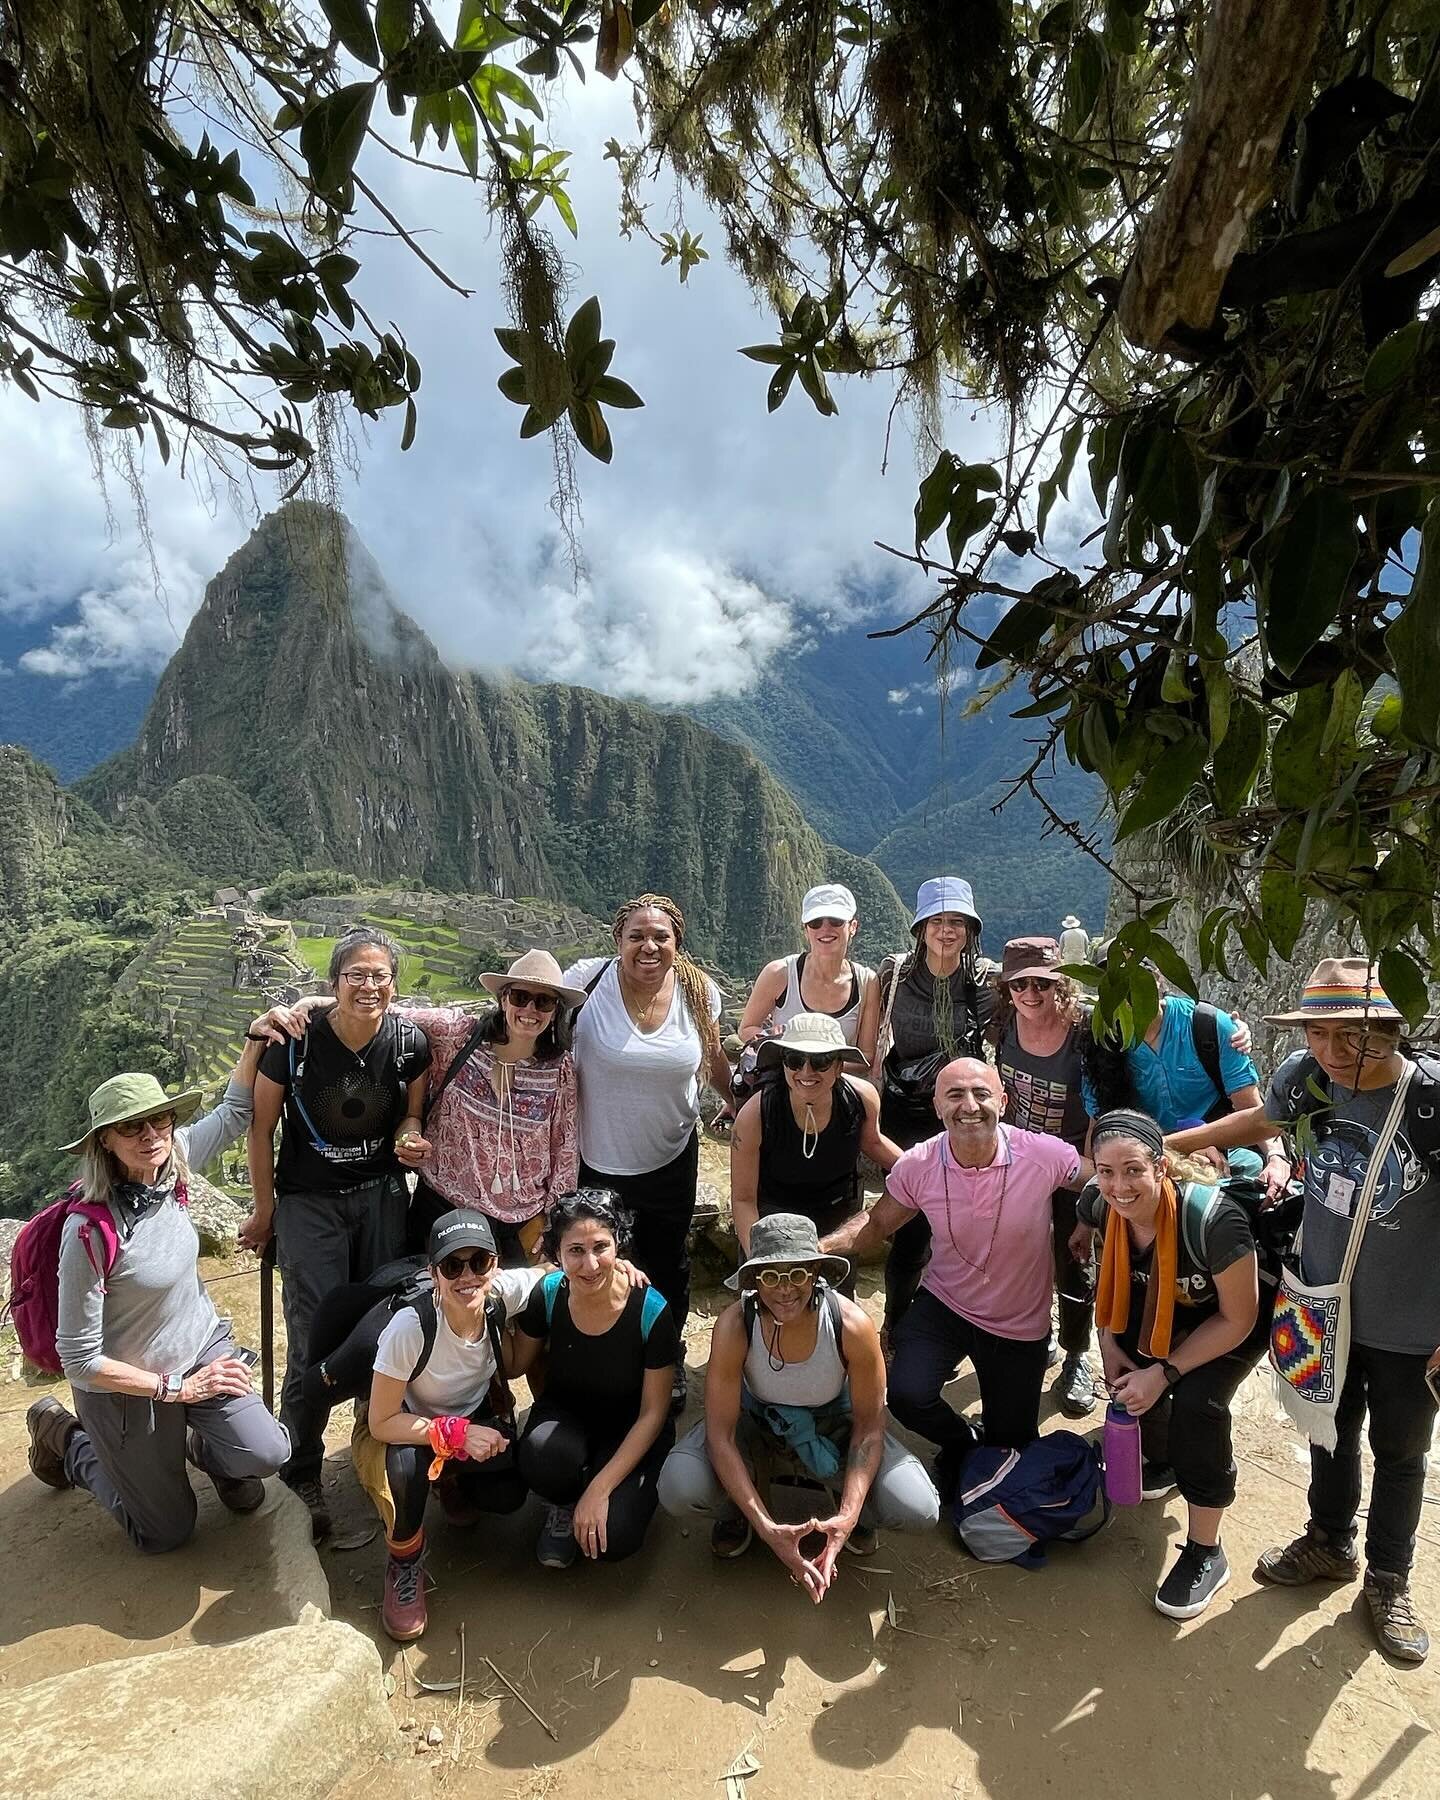 Peru has shifted my body, mind, heart and spirit! ❤️ 🇵🇪 

The people of Peru are incredible, kind, gracious, generous and so, so much more. The real and true connection to Pachamama (Mother Earth) was ever present in every conversation, gesture and